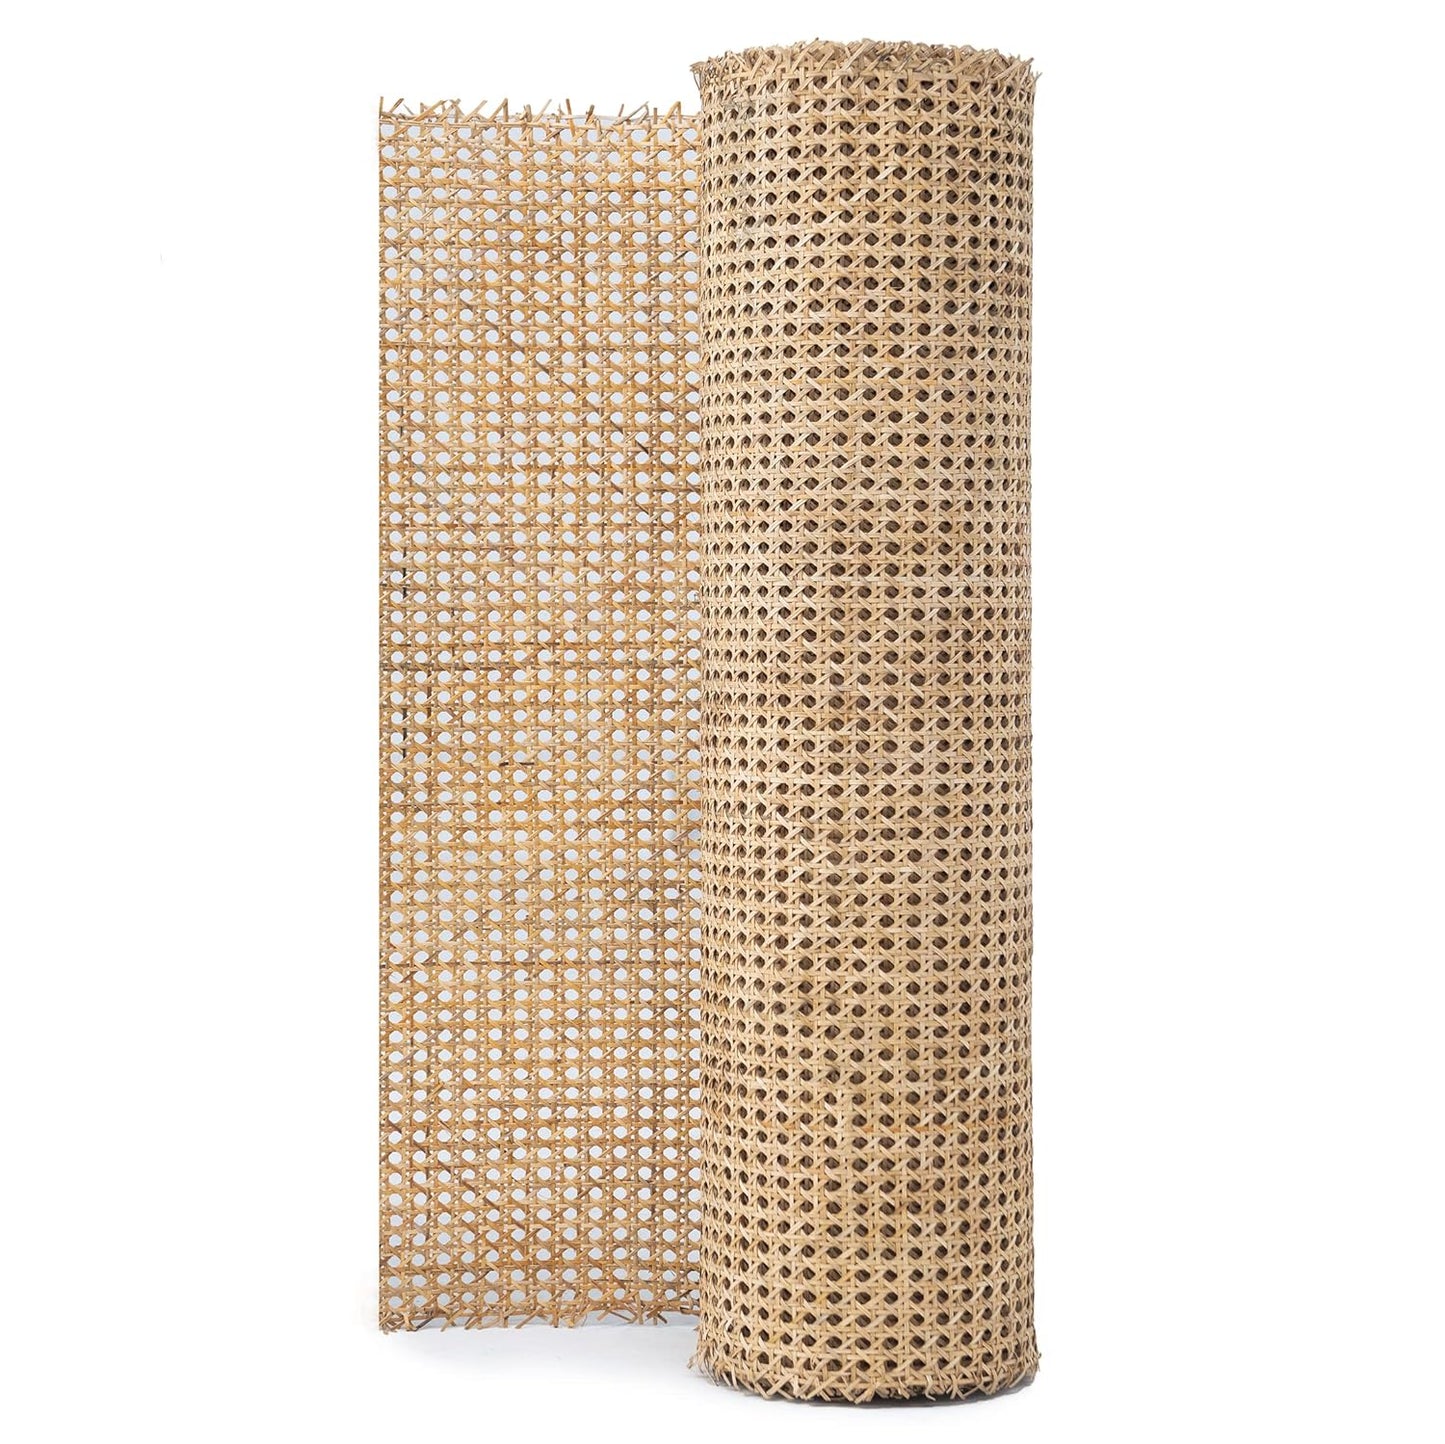 24" Width Natural Rattan Webbing for Caning Projects | 24" W X 5 Ft L | Pre-Woven Open Mesh Cane - Cane Webbing Sheet- Natural Rattan Cane Webbing Roll (5 FEET)